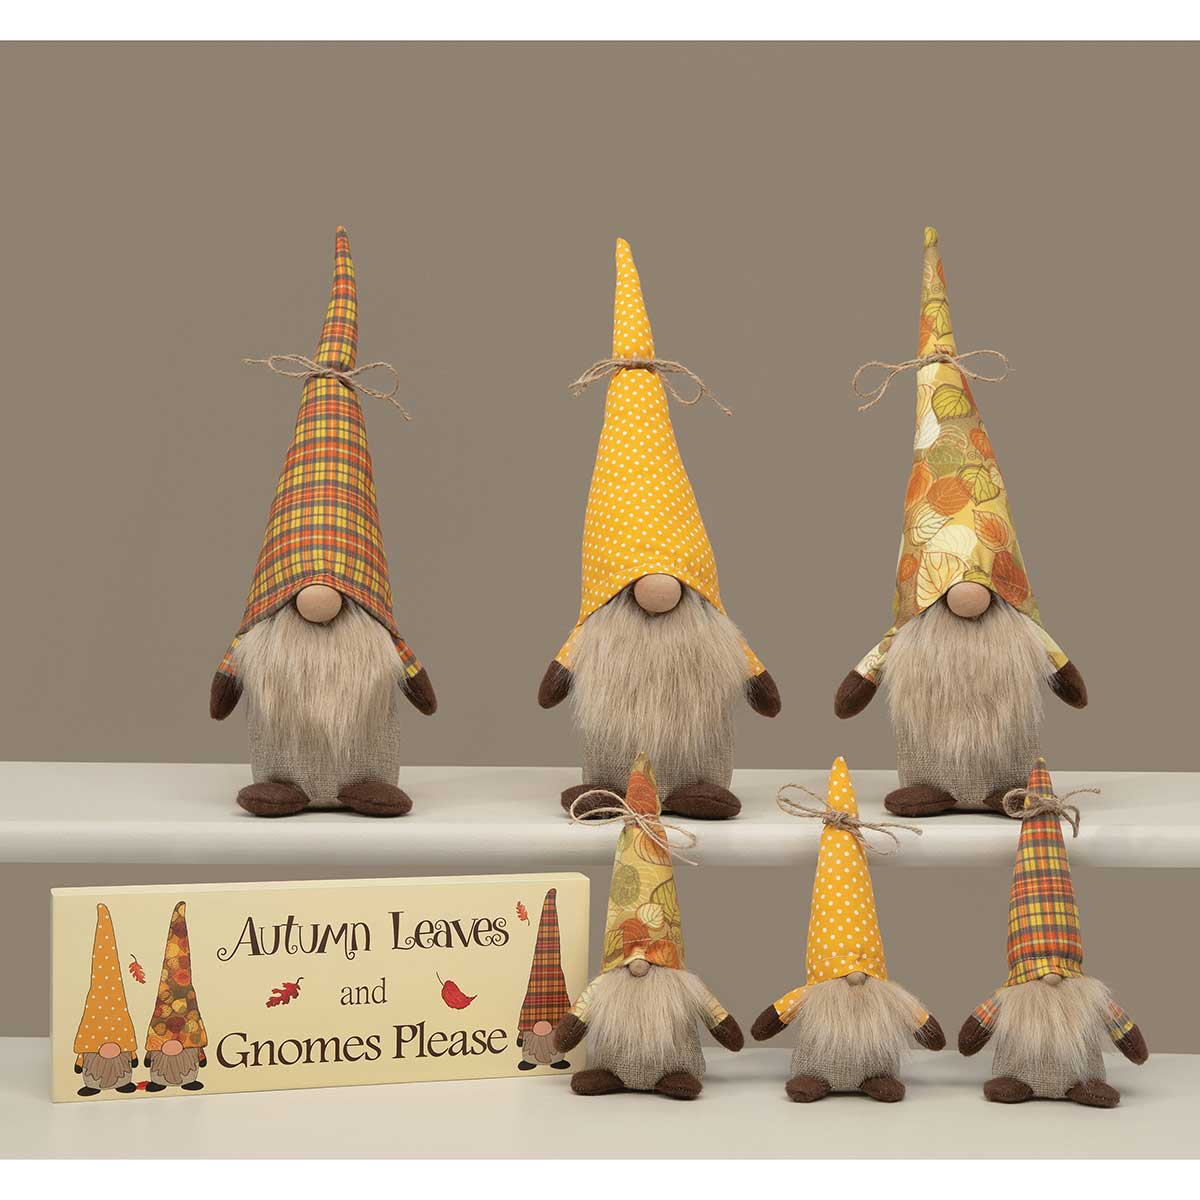 b50 BLOCK GNOMES PLEASE LEAVES 12IN X .75IN X 4.5IN BEIGE WOOD - Click Image to Close